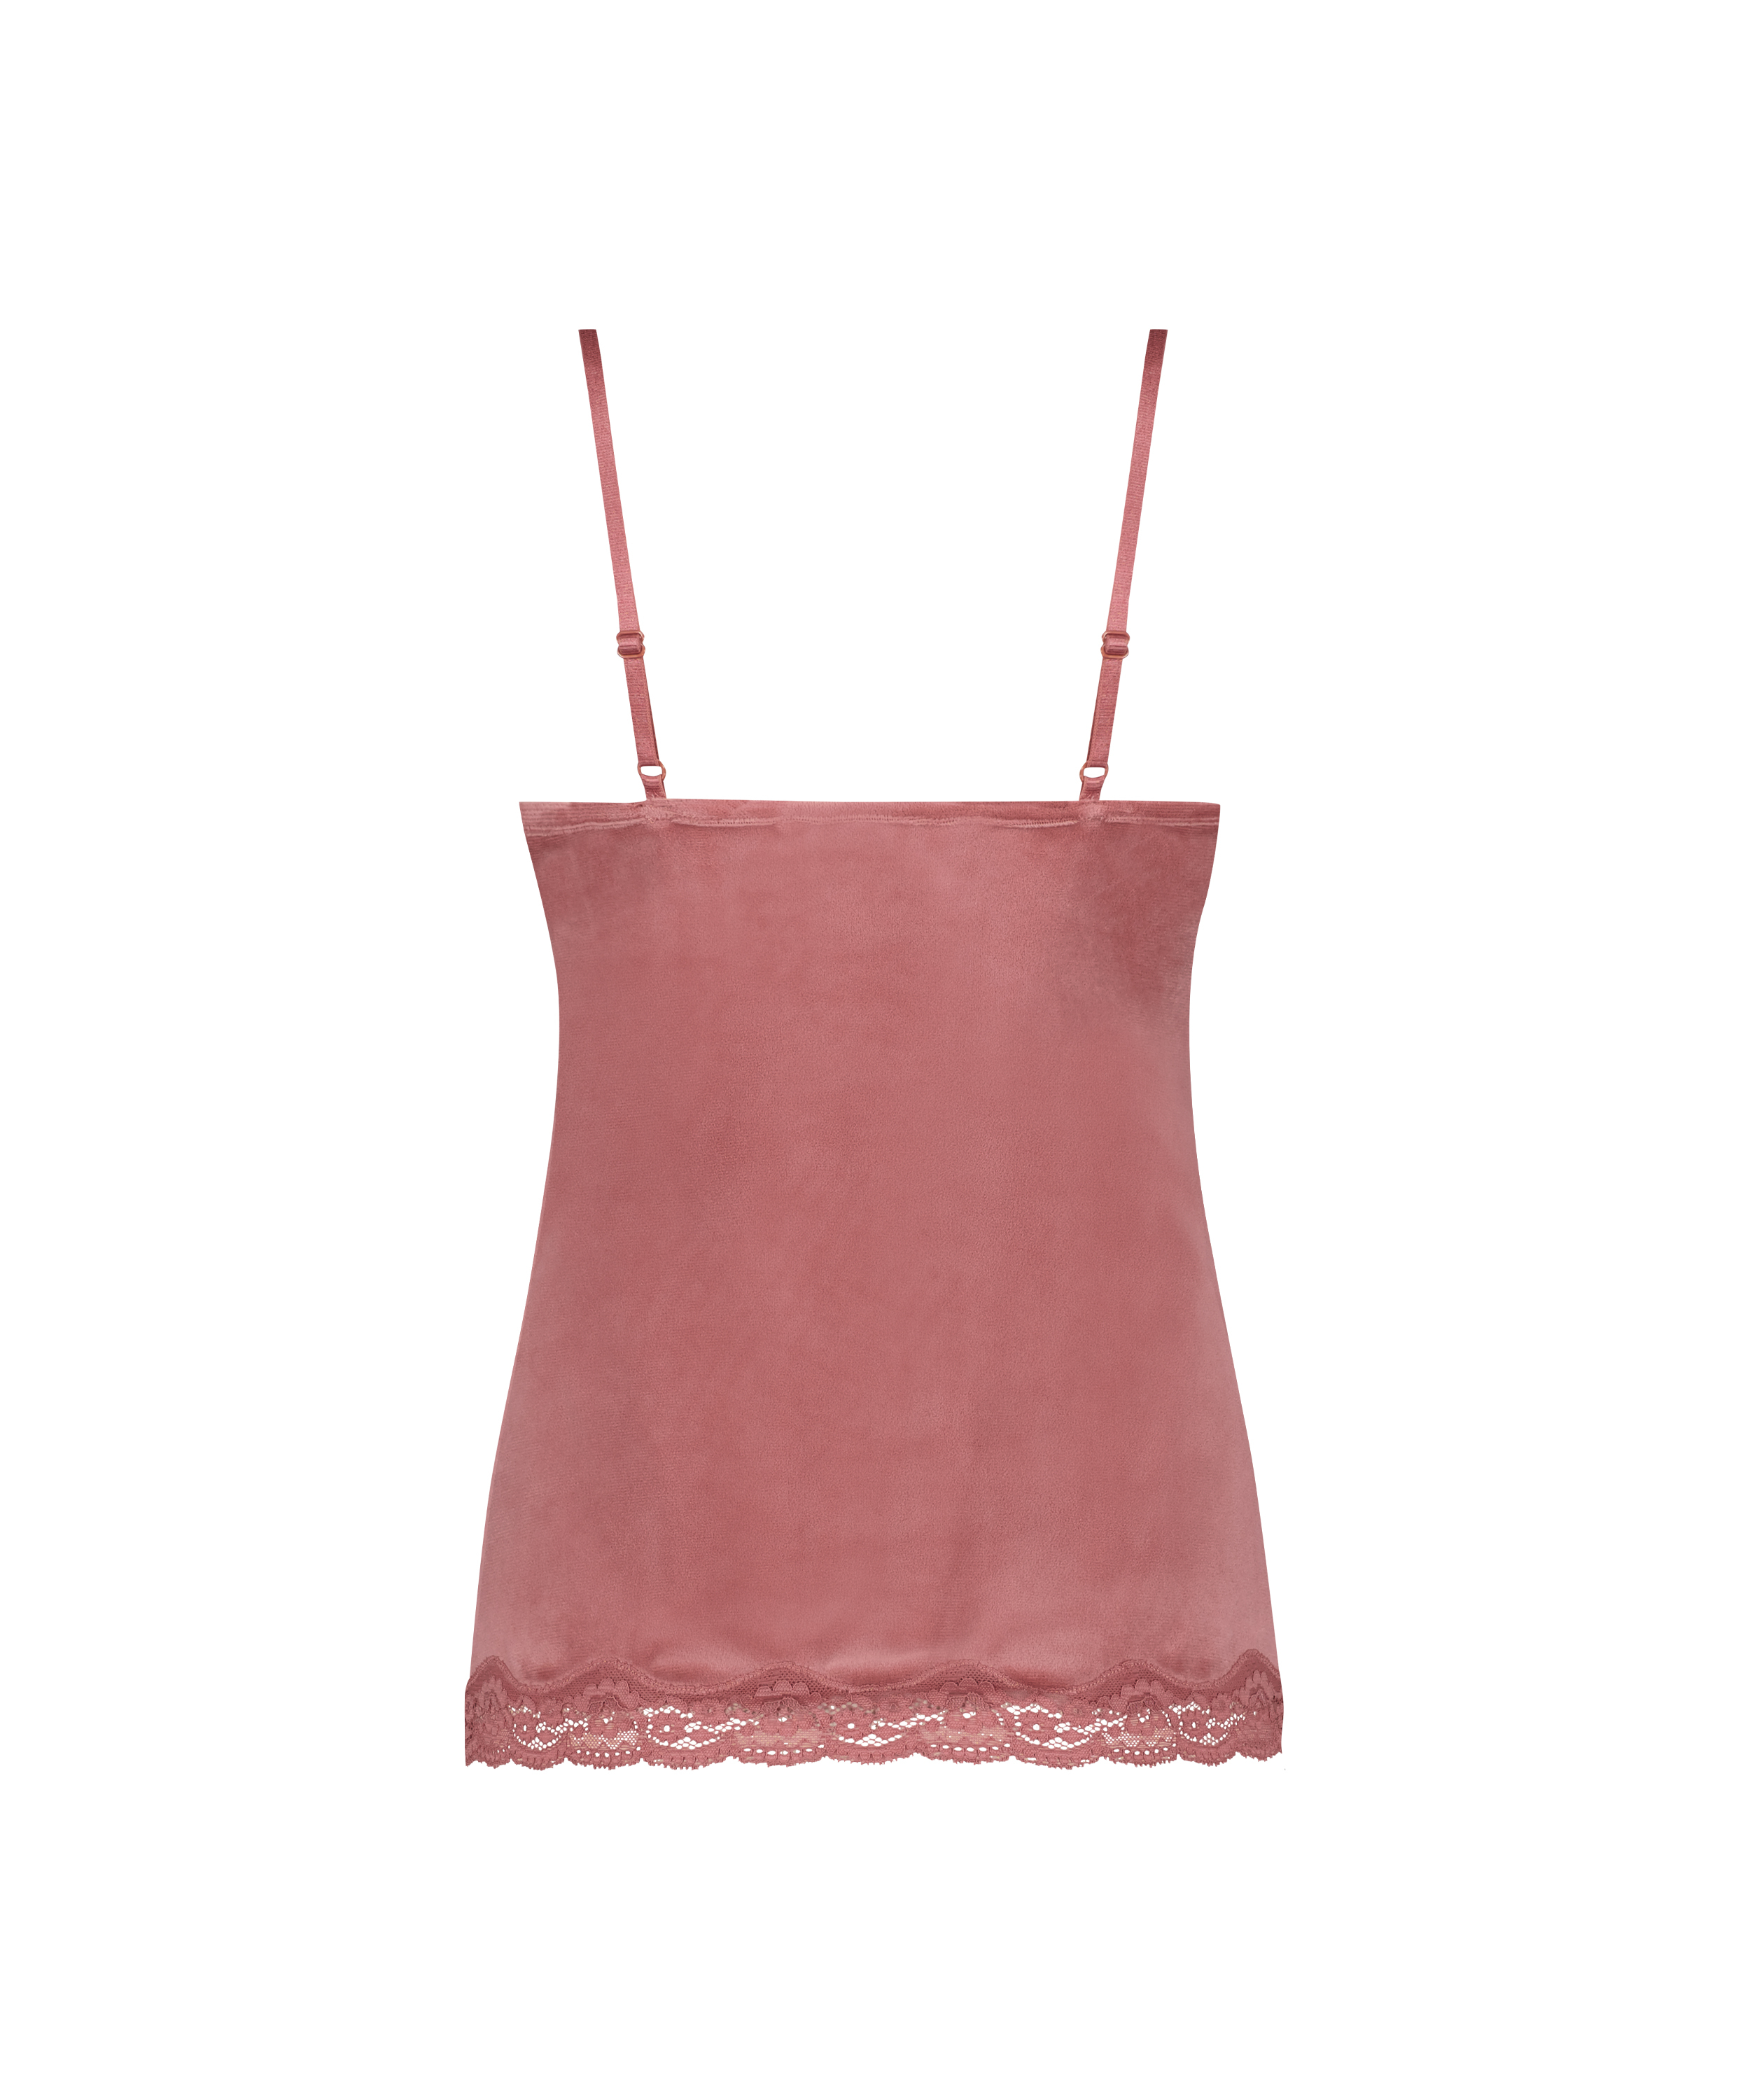 Cami top Velours Lace, pink, main